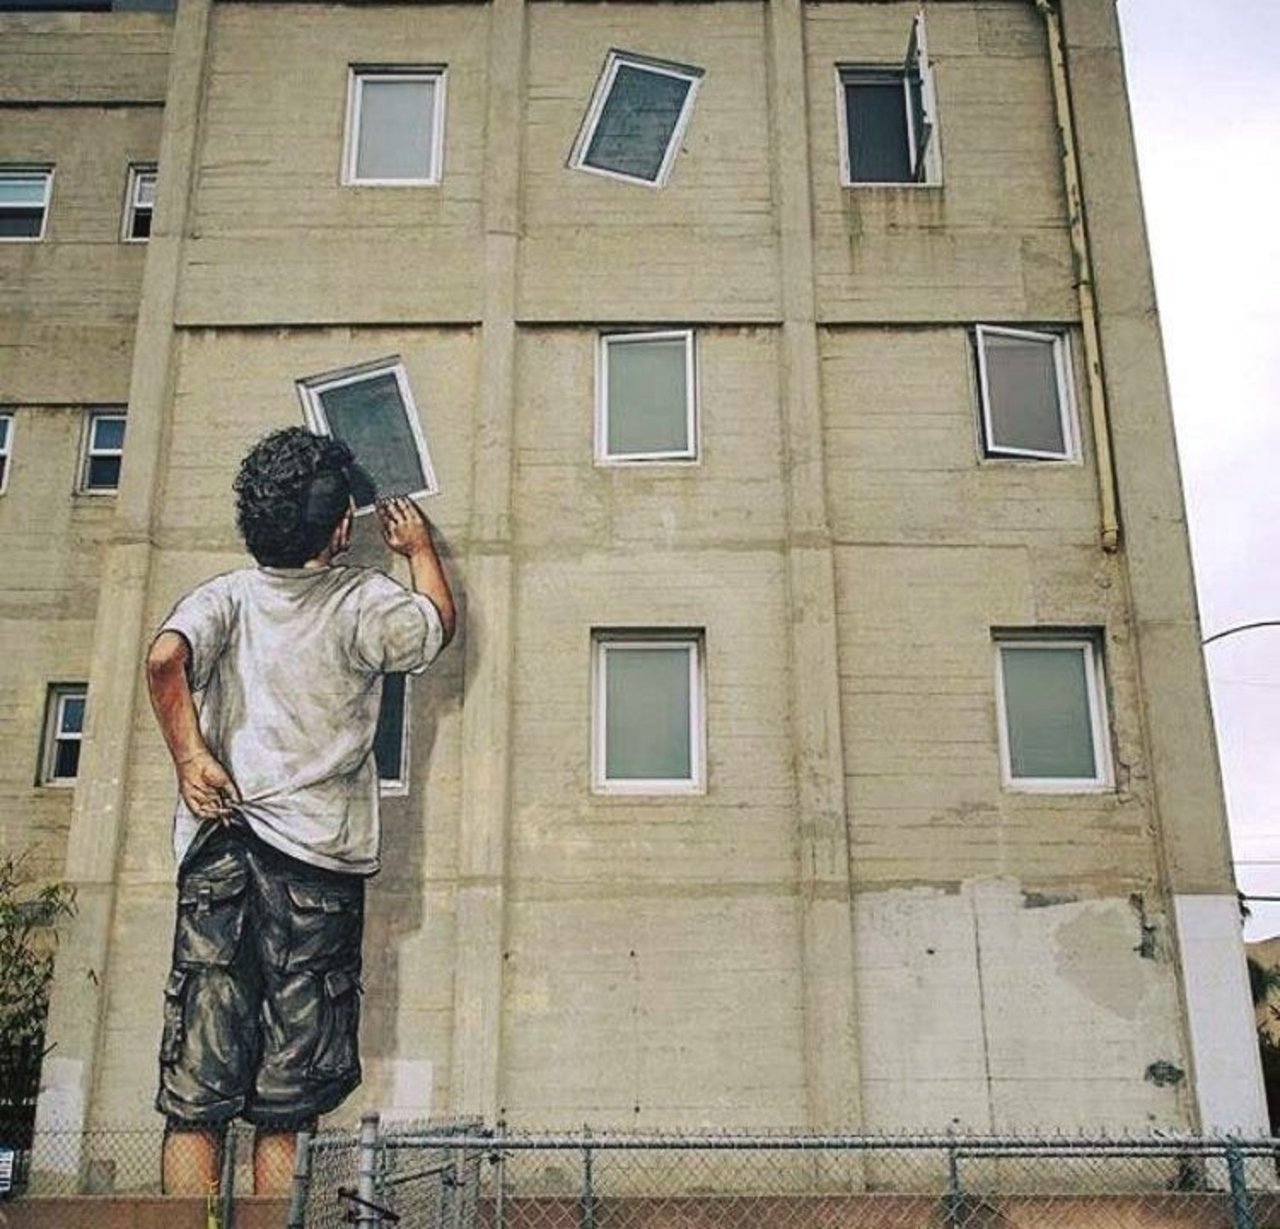 Youth curiosity – #streetart – Be ▲rtist – Be ▲rt Magazine https://beartistbeart.com/2016/07/21/youth-curiosity-streetart/?utm_campaign=crowdfire&utm_content=crowdfire&utm_medium=social&utm_source=twitter https://t.co/5rq9UeNcsP